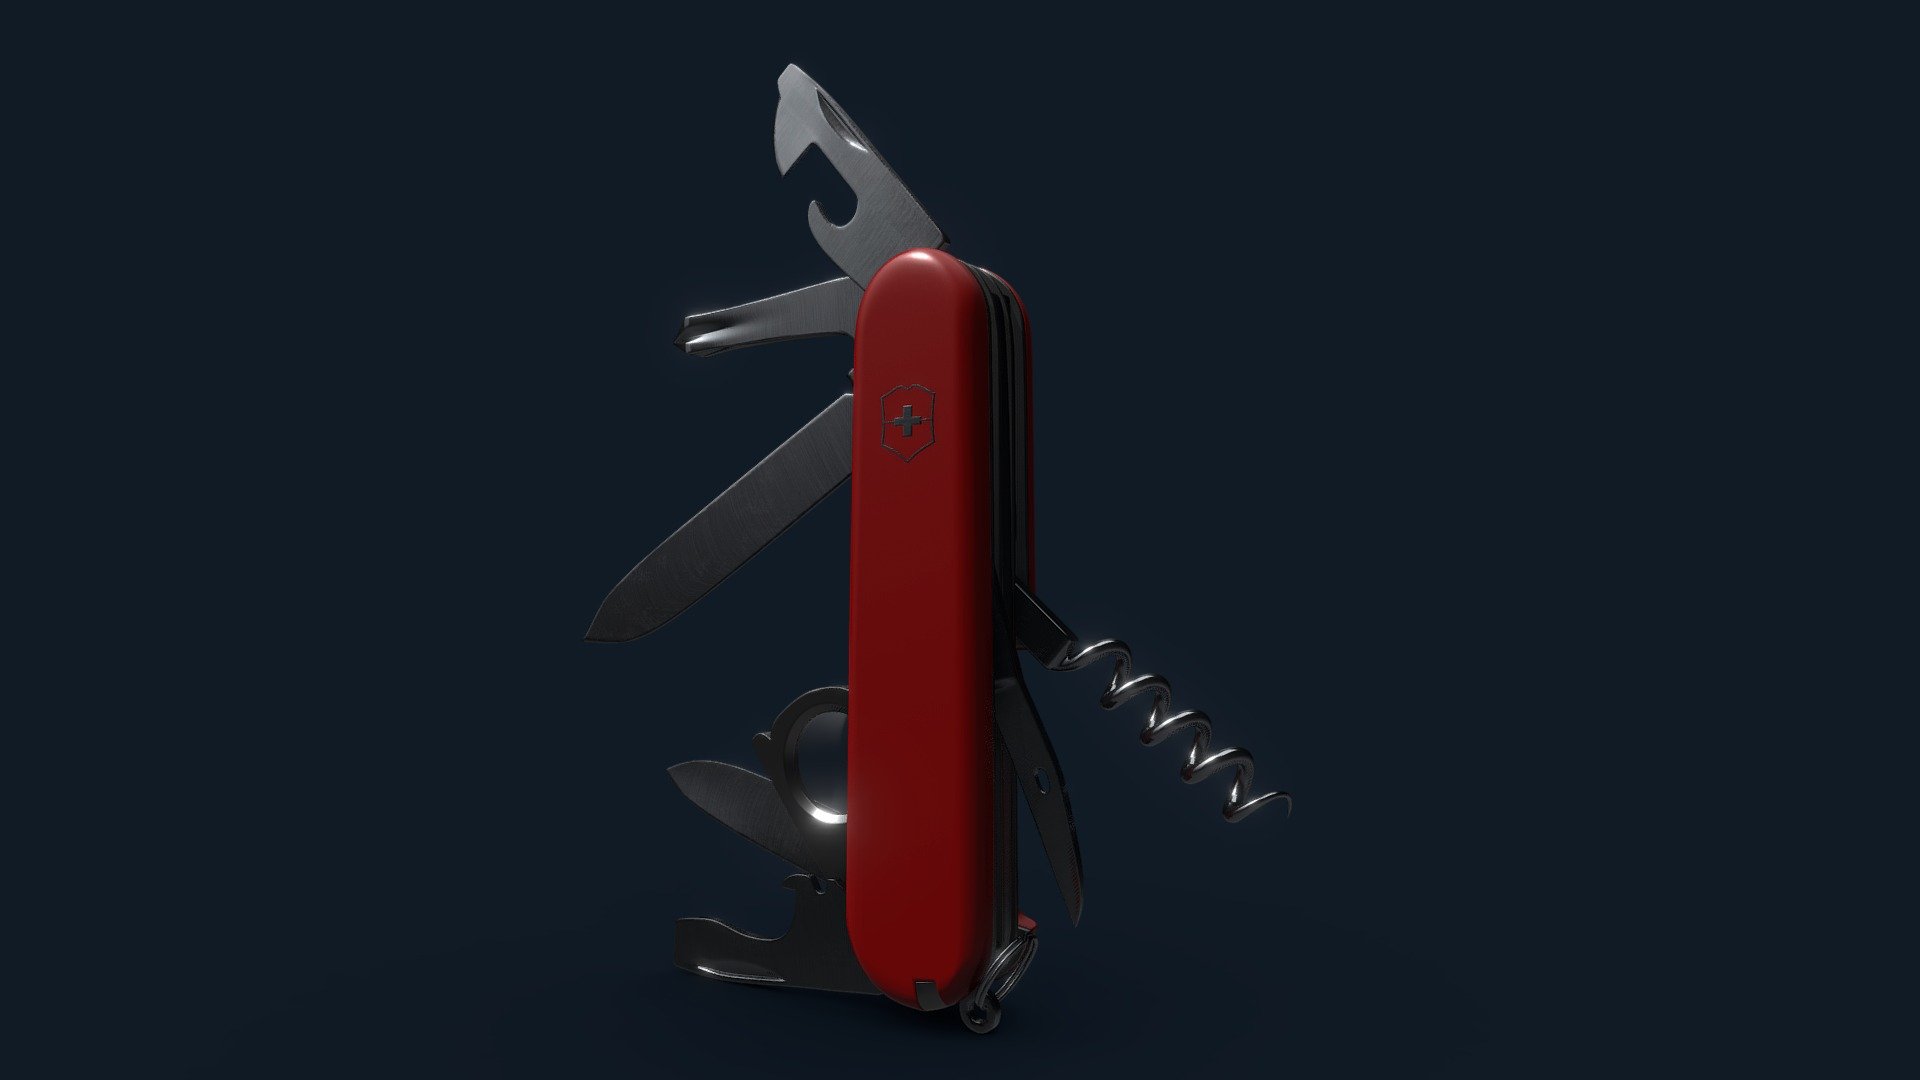 Follow us on Instagram: https://www.instagram.com/agencia.alterego/

Victorinox Explorer Swiss Army knife modeled in 3DS Max. Textured in Substance Painter.
Highpoly.
High resolution textures 3d model